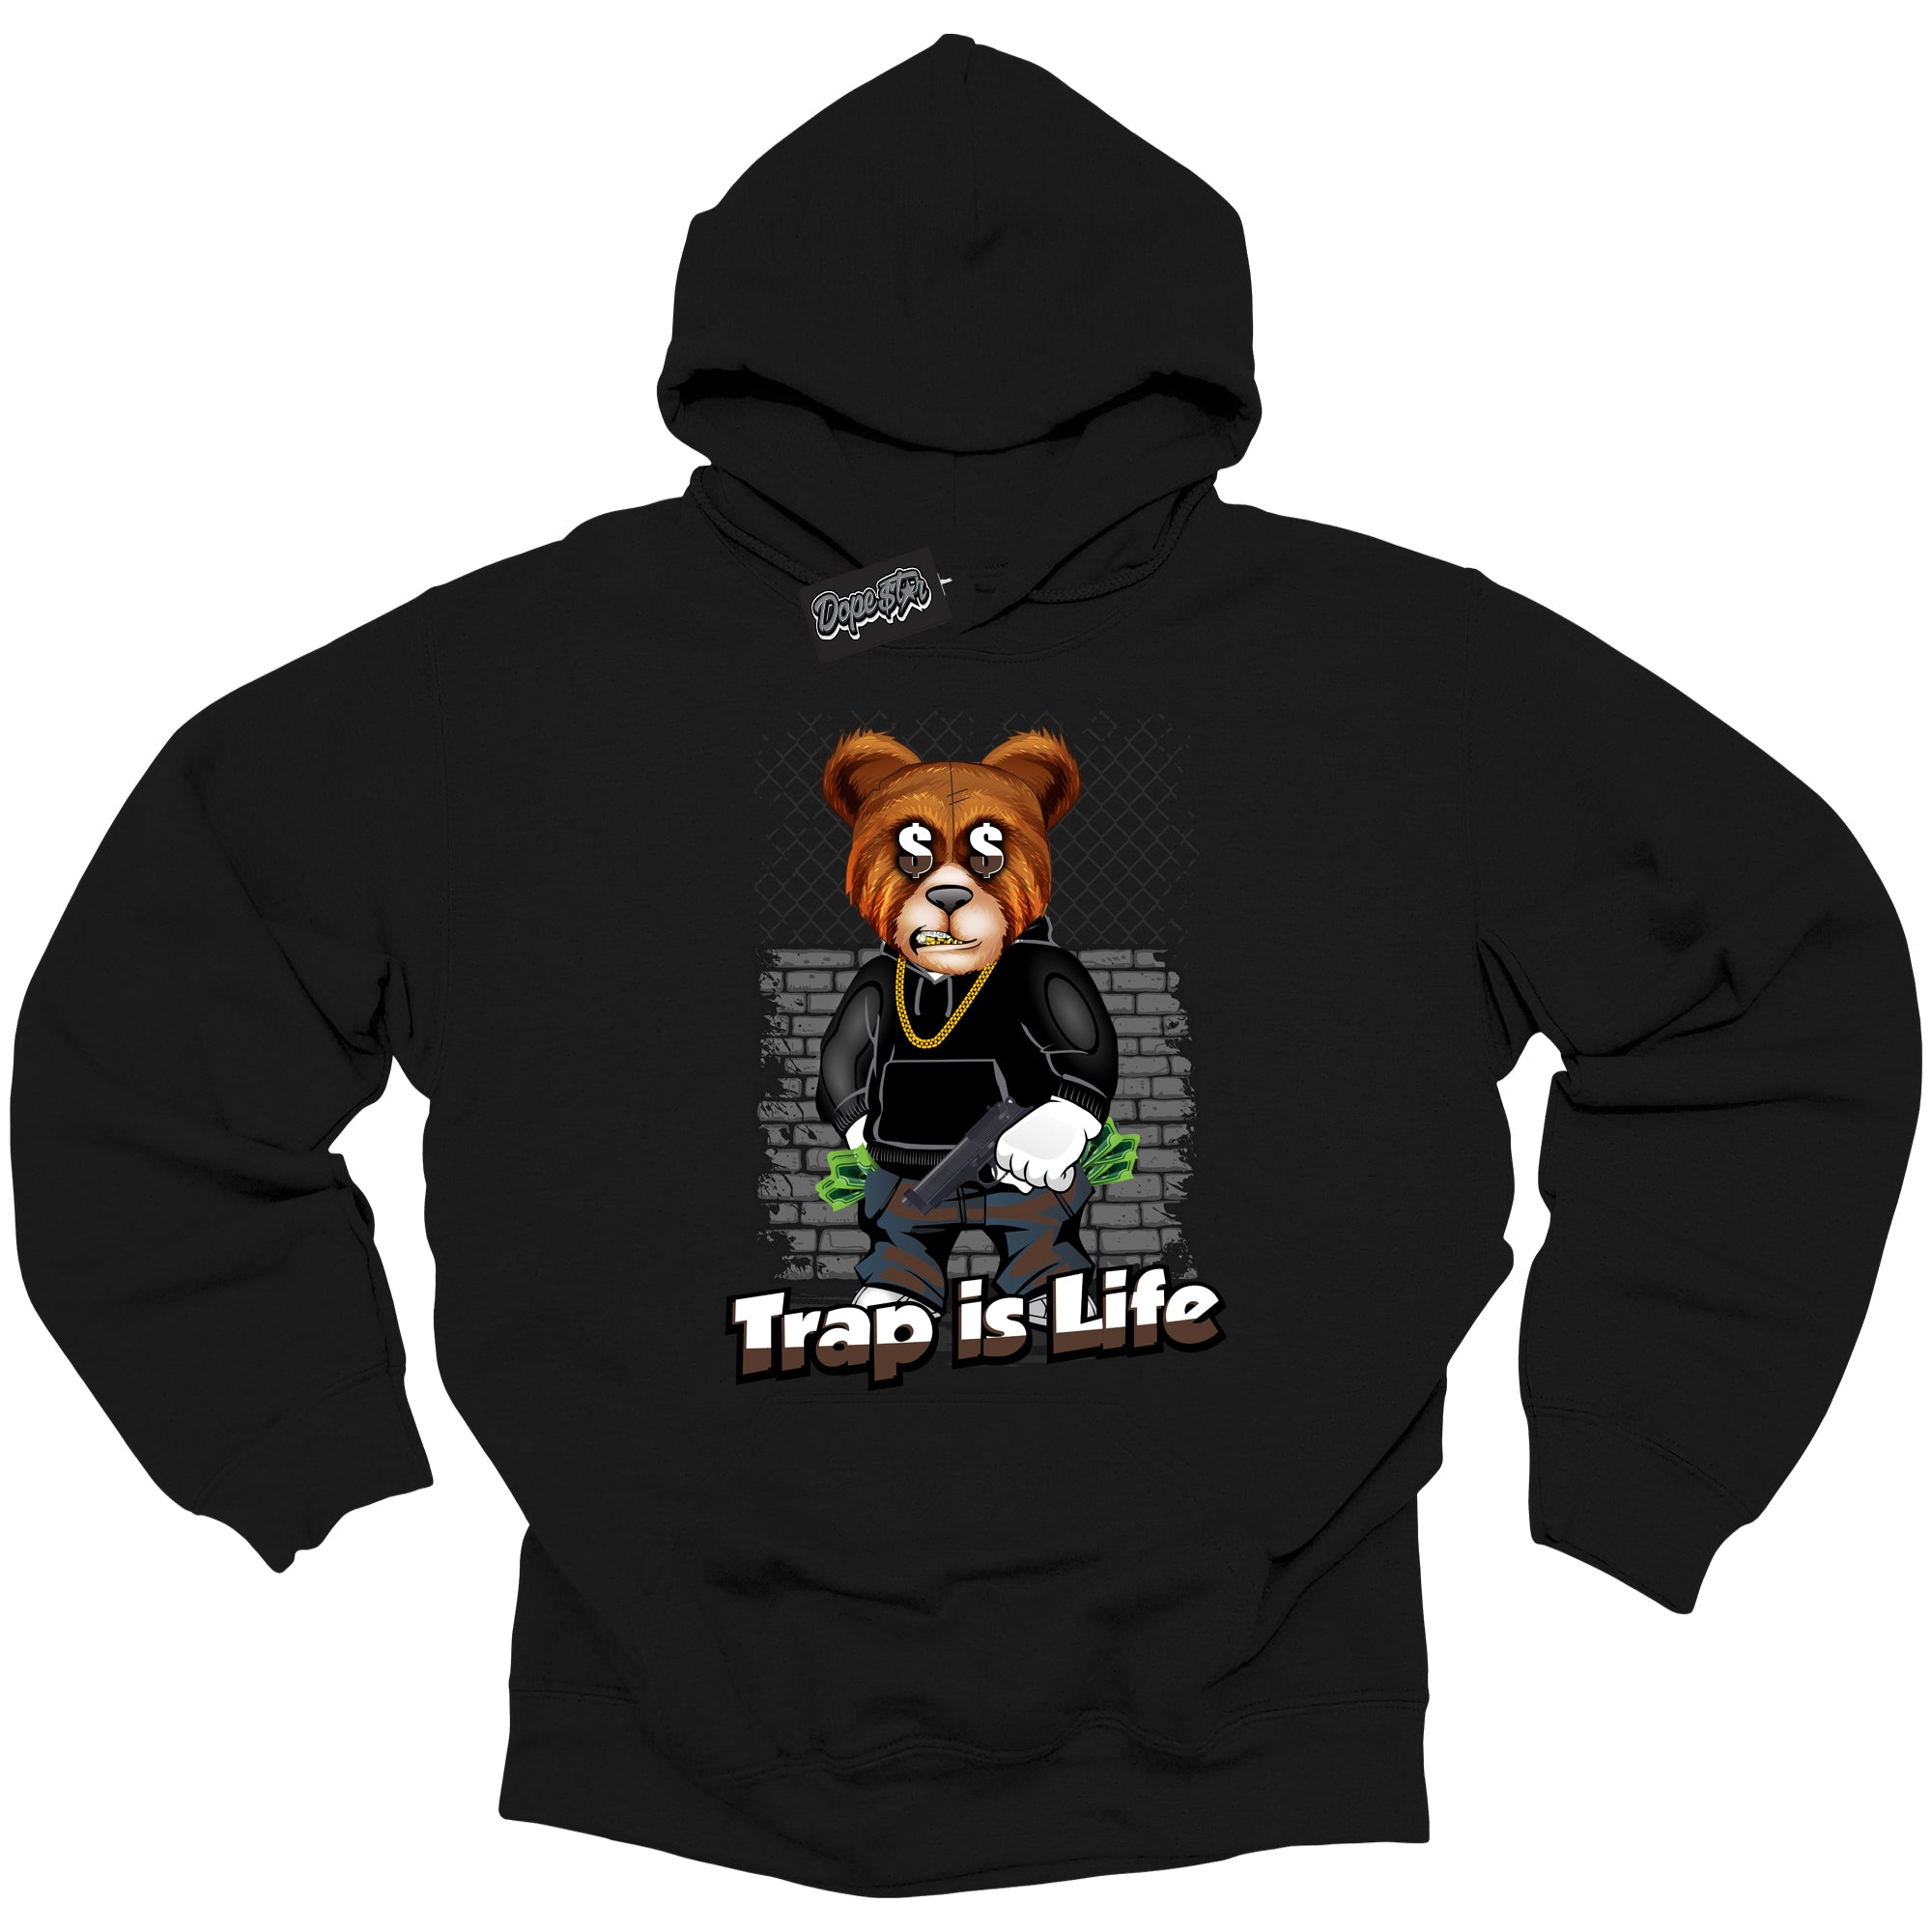 Cool Black Graphic DopeStar Hoodie with “ Trap Is Life “ print, that perfectly matches Palomino 1s sneakers